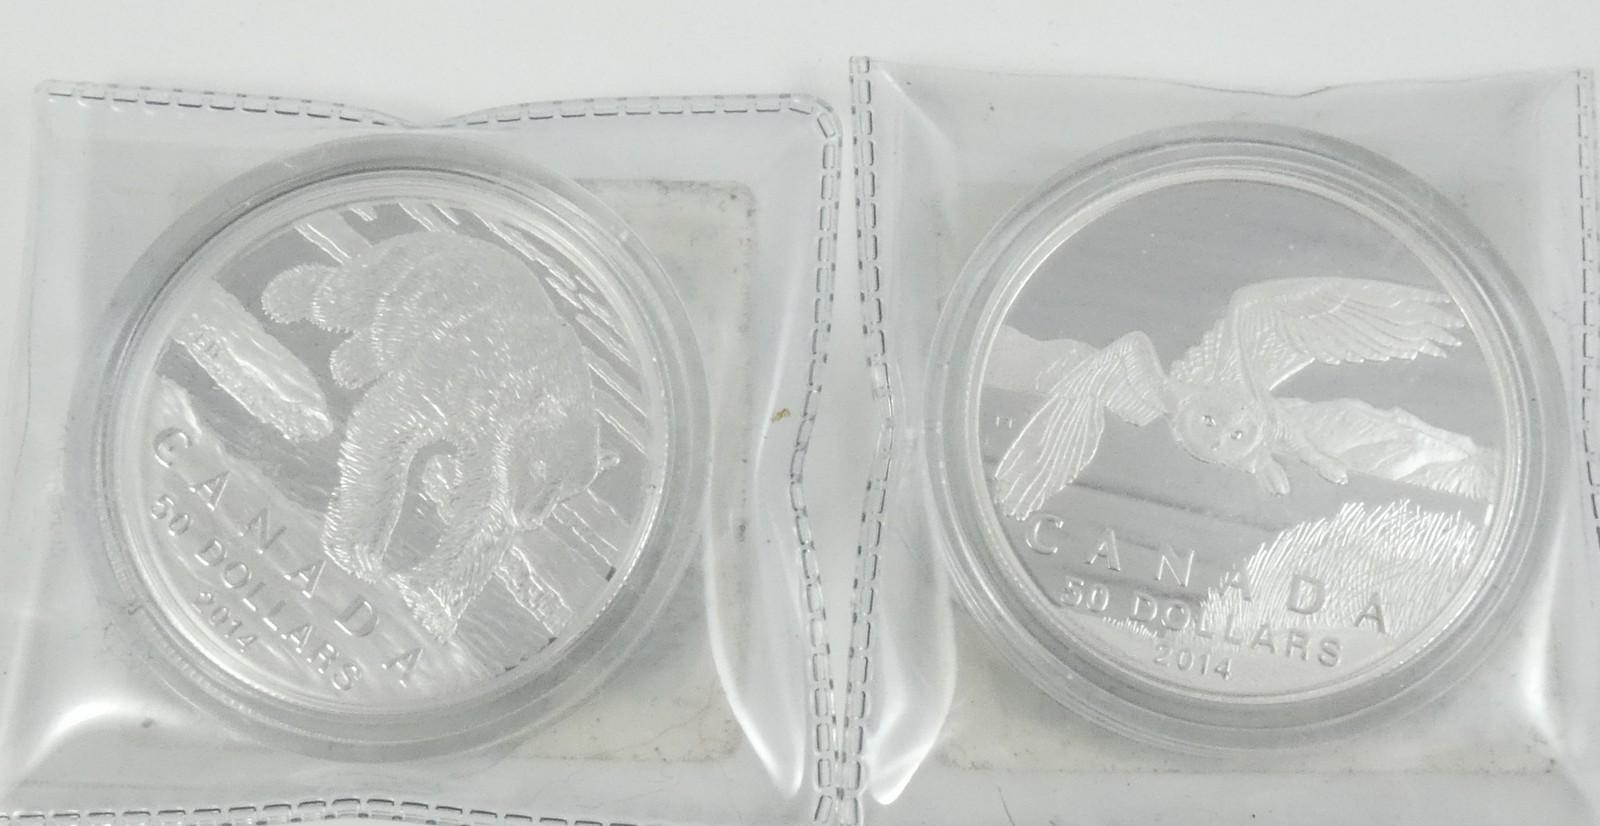 2 CANADIAN SILVER COINS